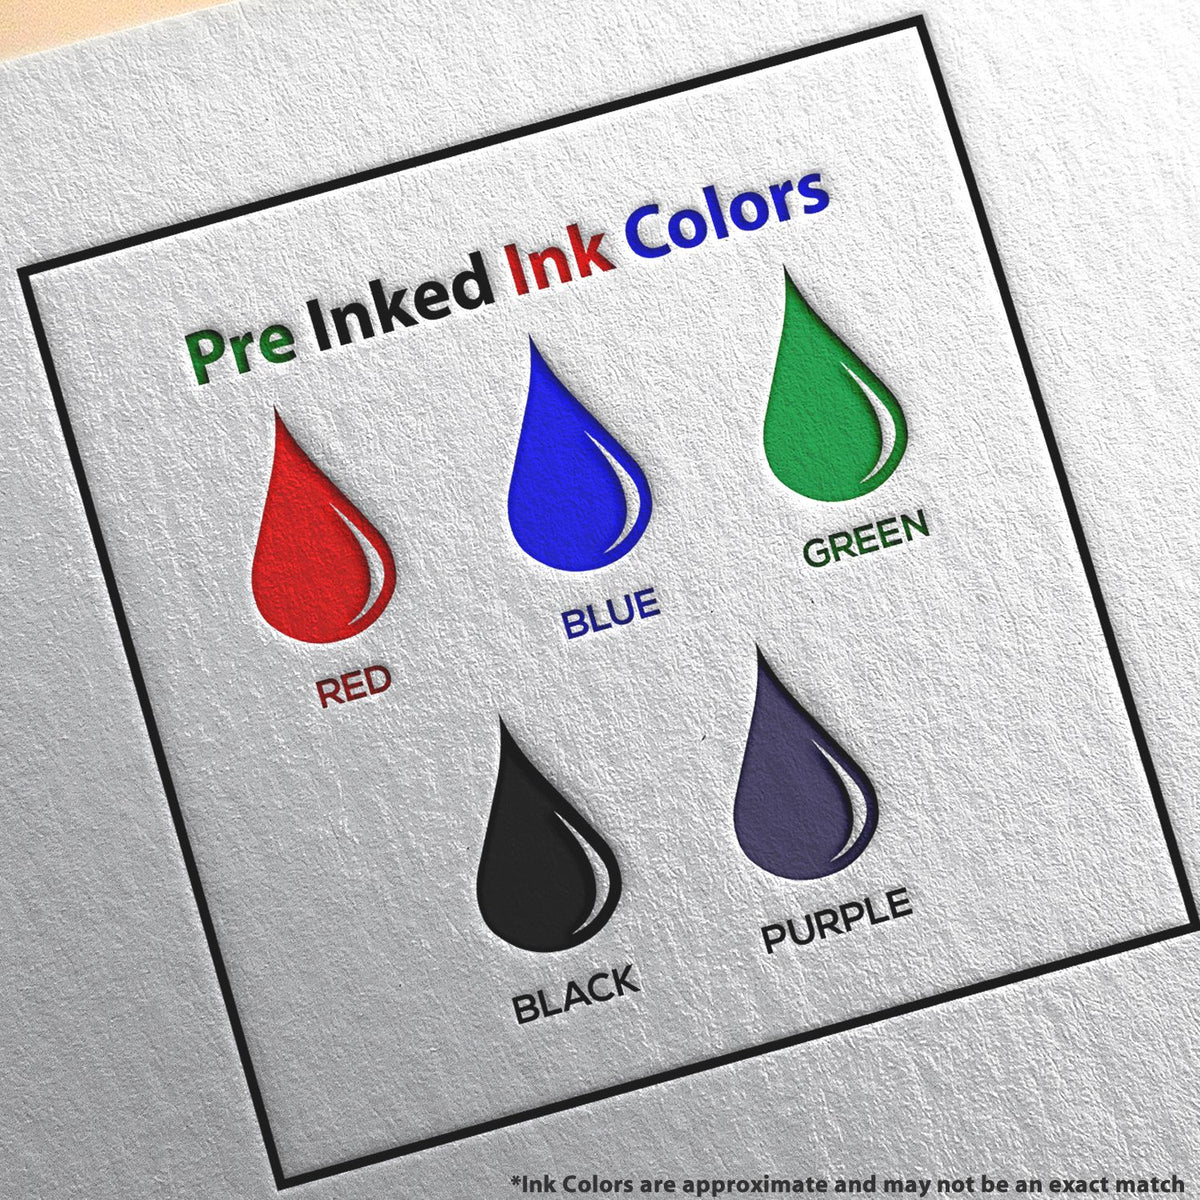 A picture showing the different ink colors or hues available for the Slim Pre-Inked Alaska Professional Engineer Seal Stamp product.